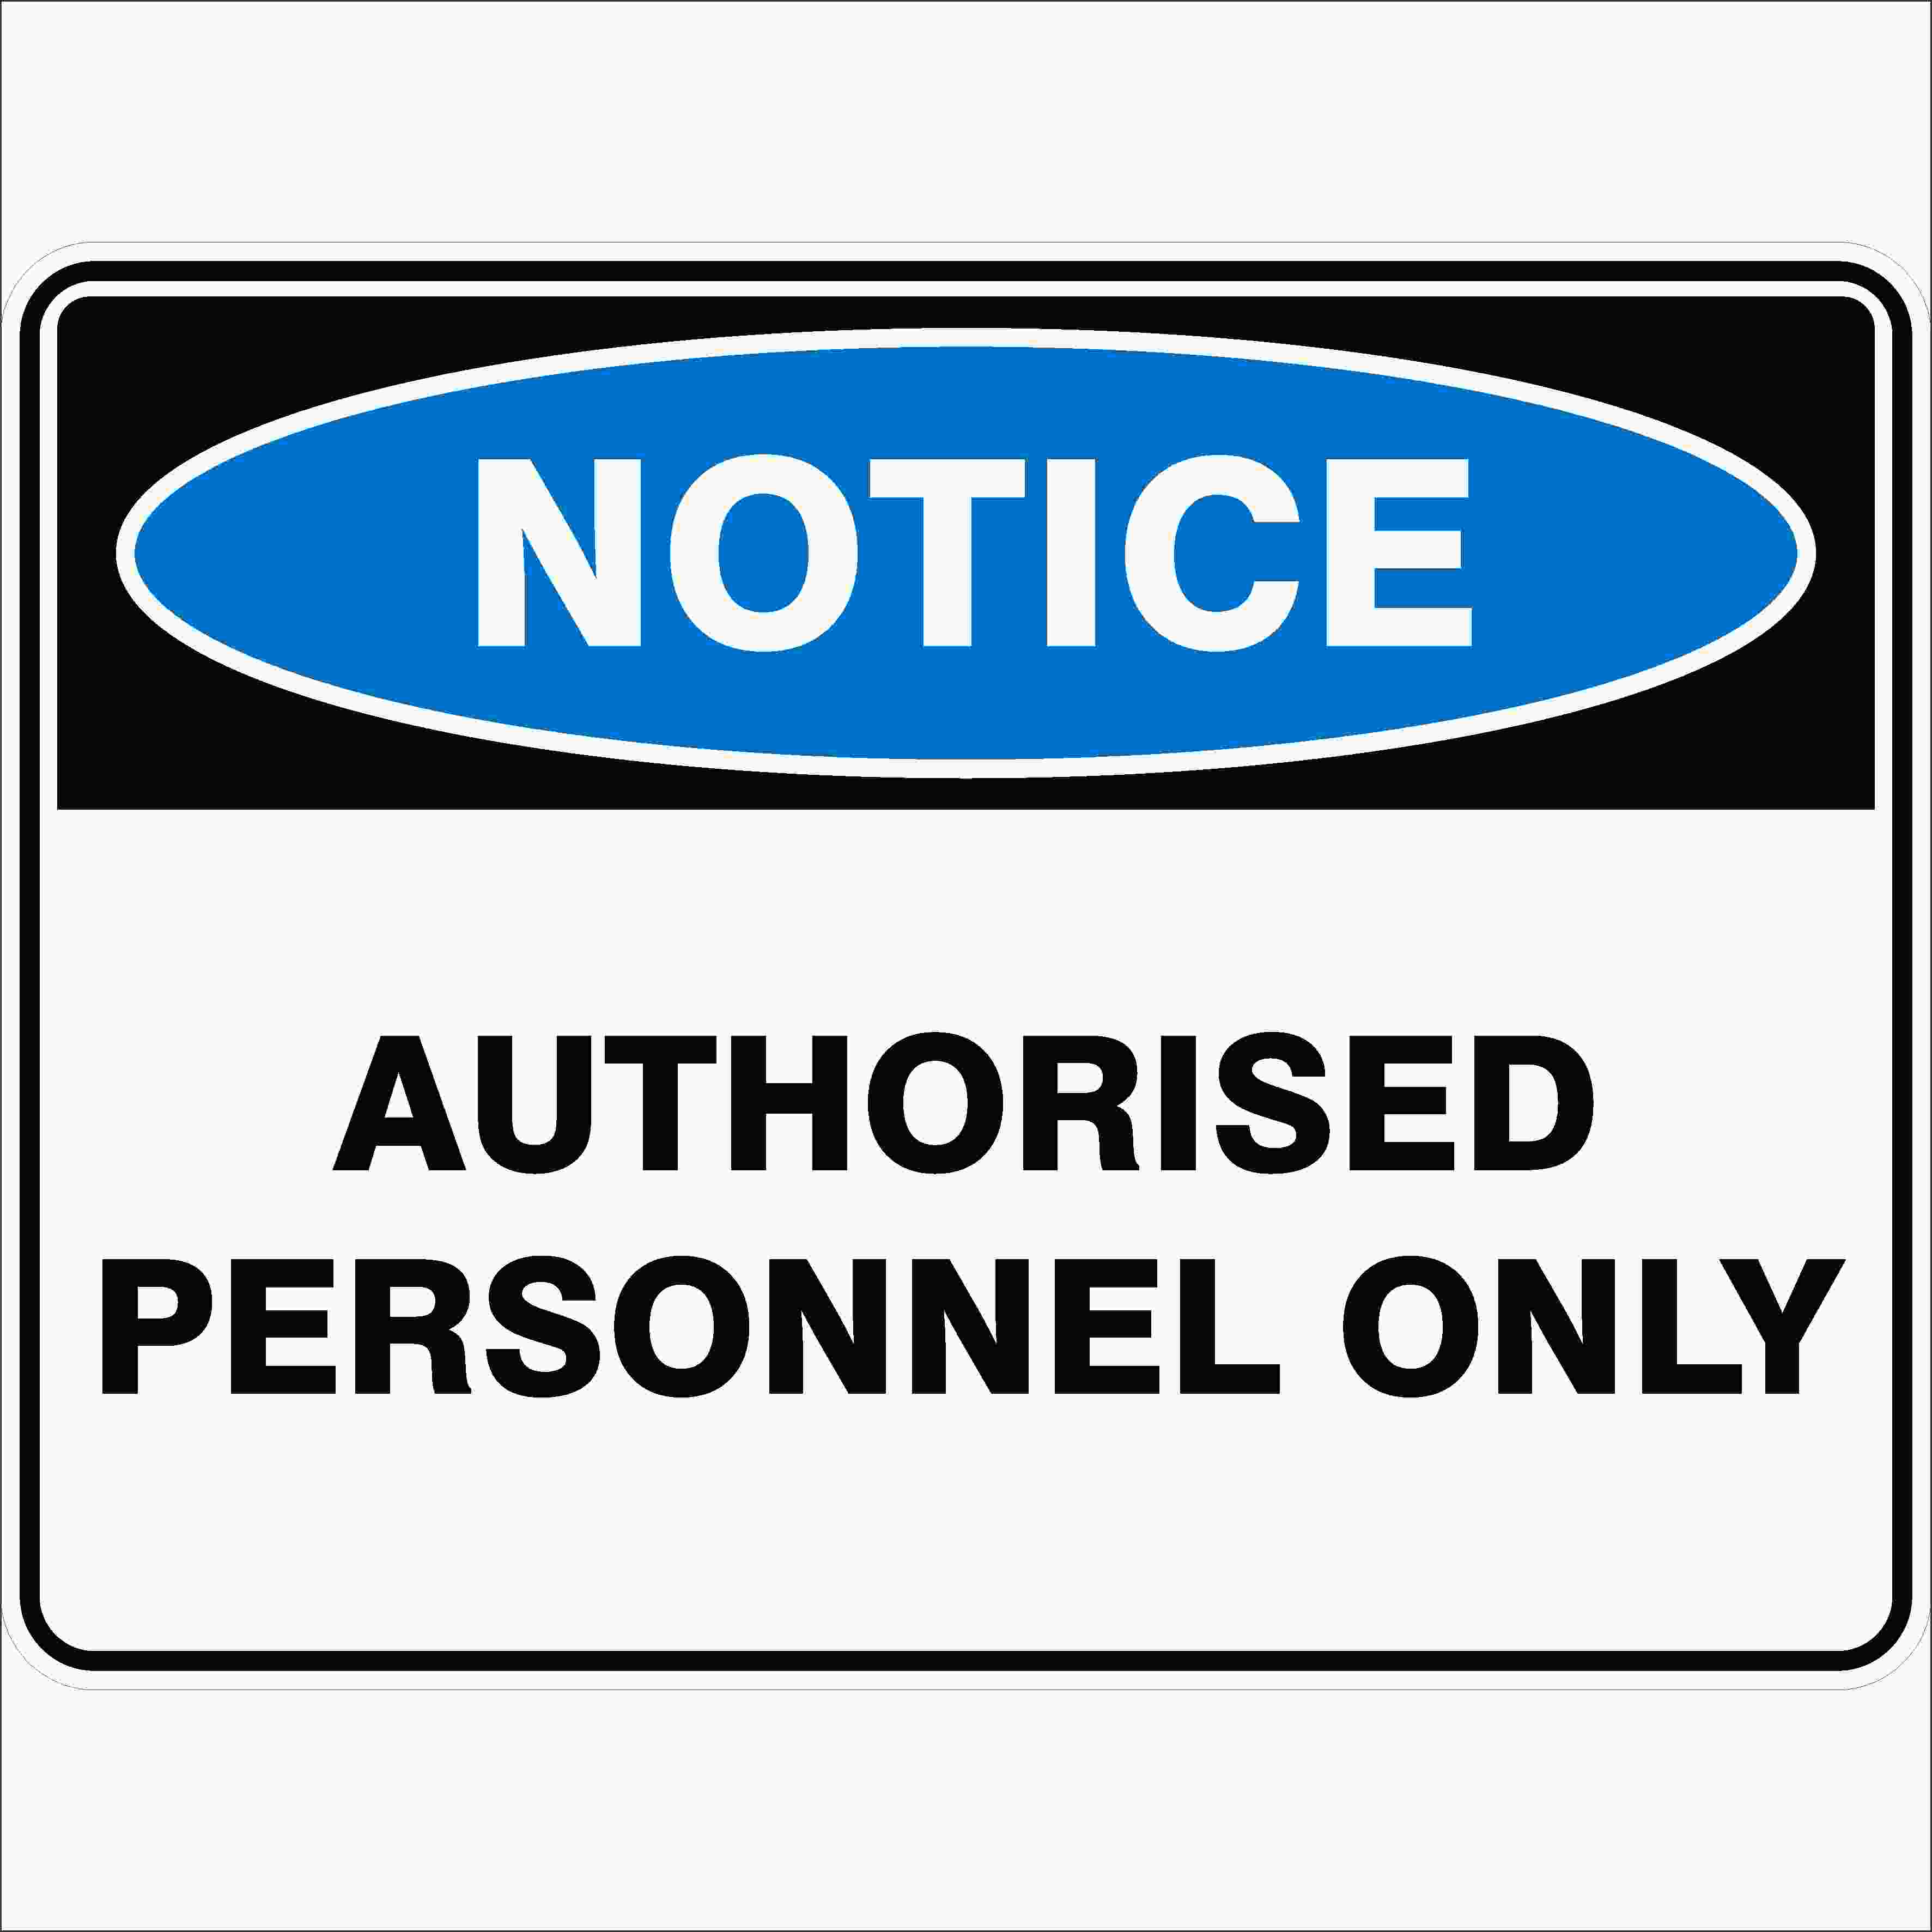 AUTHORISED PERSONNEL ONLY Buy Now Discount Safety Signs Australia